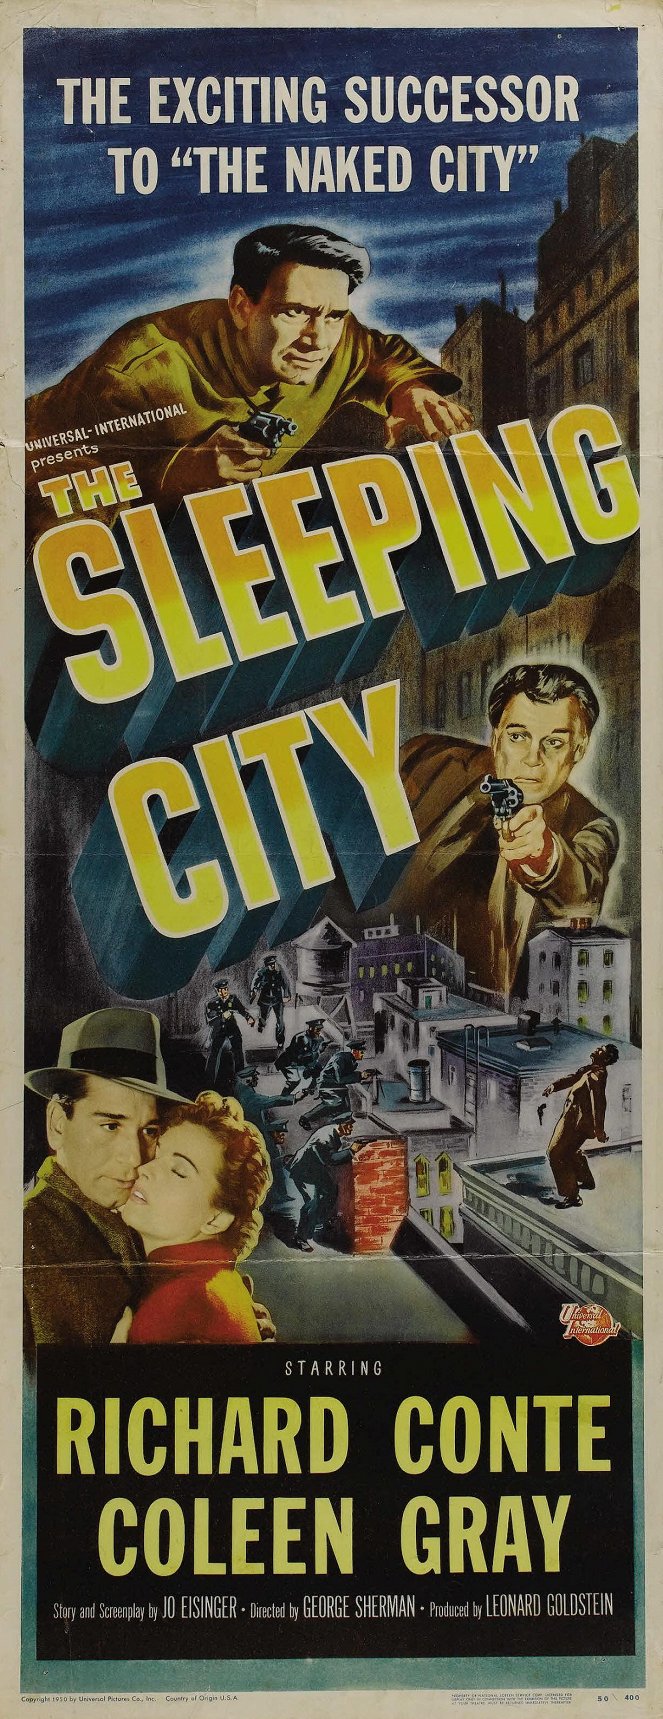 The Sleeping City - Posters